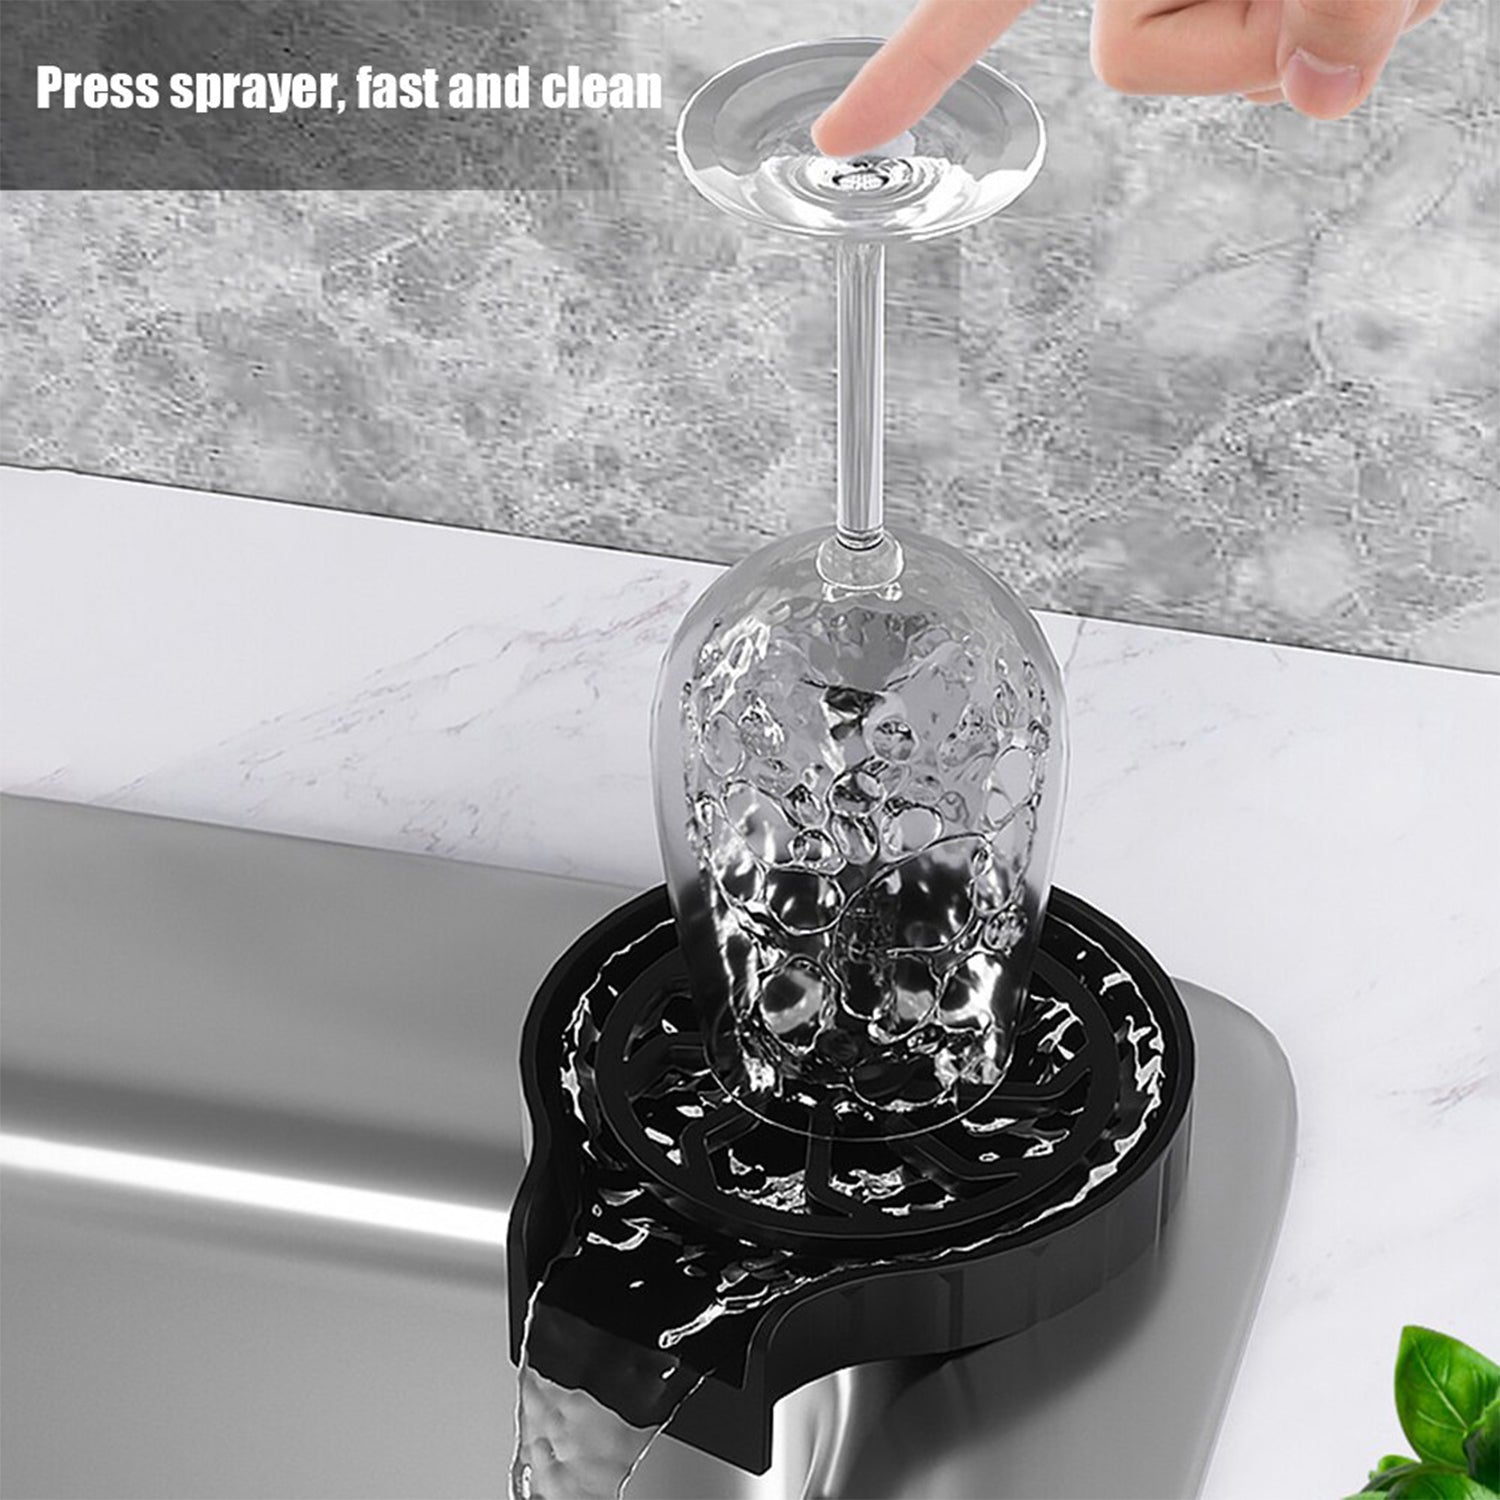 2232 Automatic Cup Washer or Glass Rinser for Kitchen Sink, Black Kitchen Sink Cleaning Spray Cup Washer, Bar Glass Washer. DeoDap